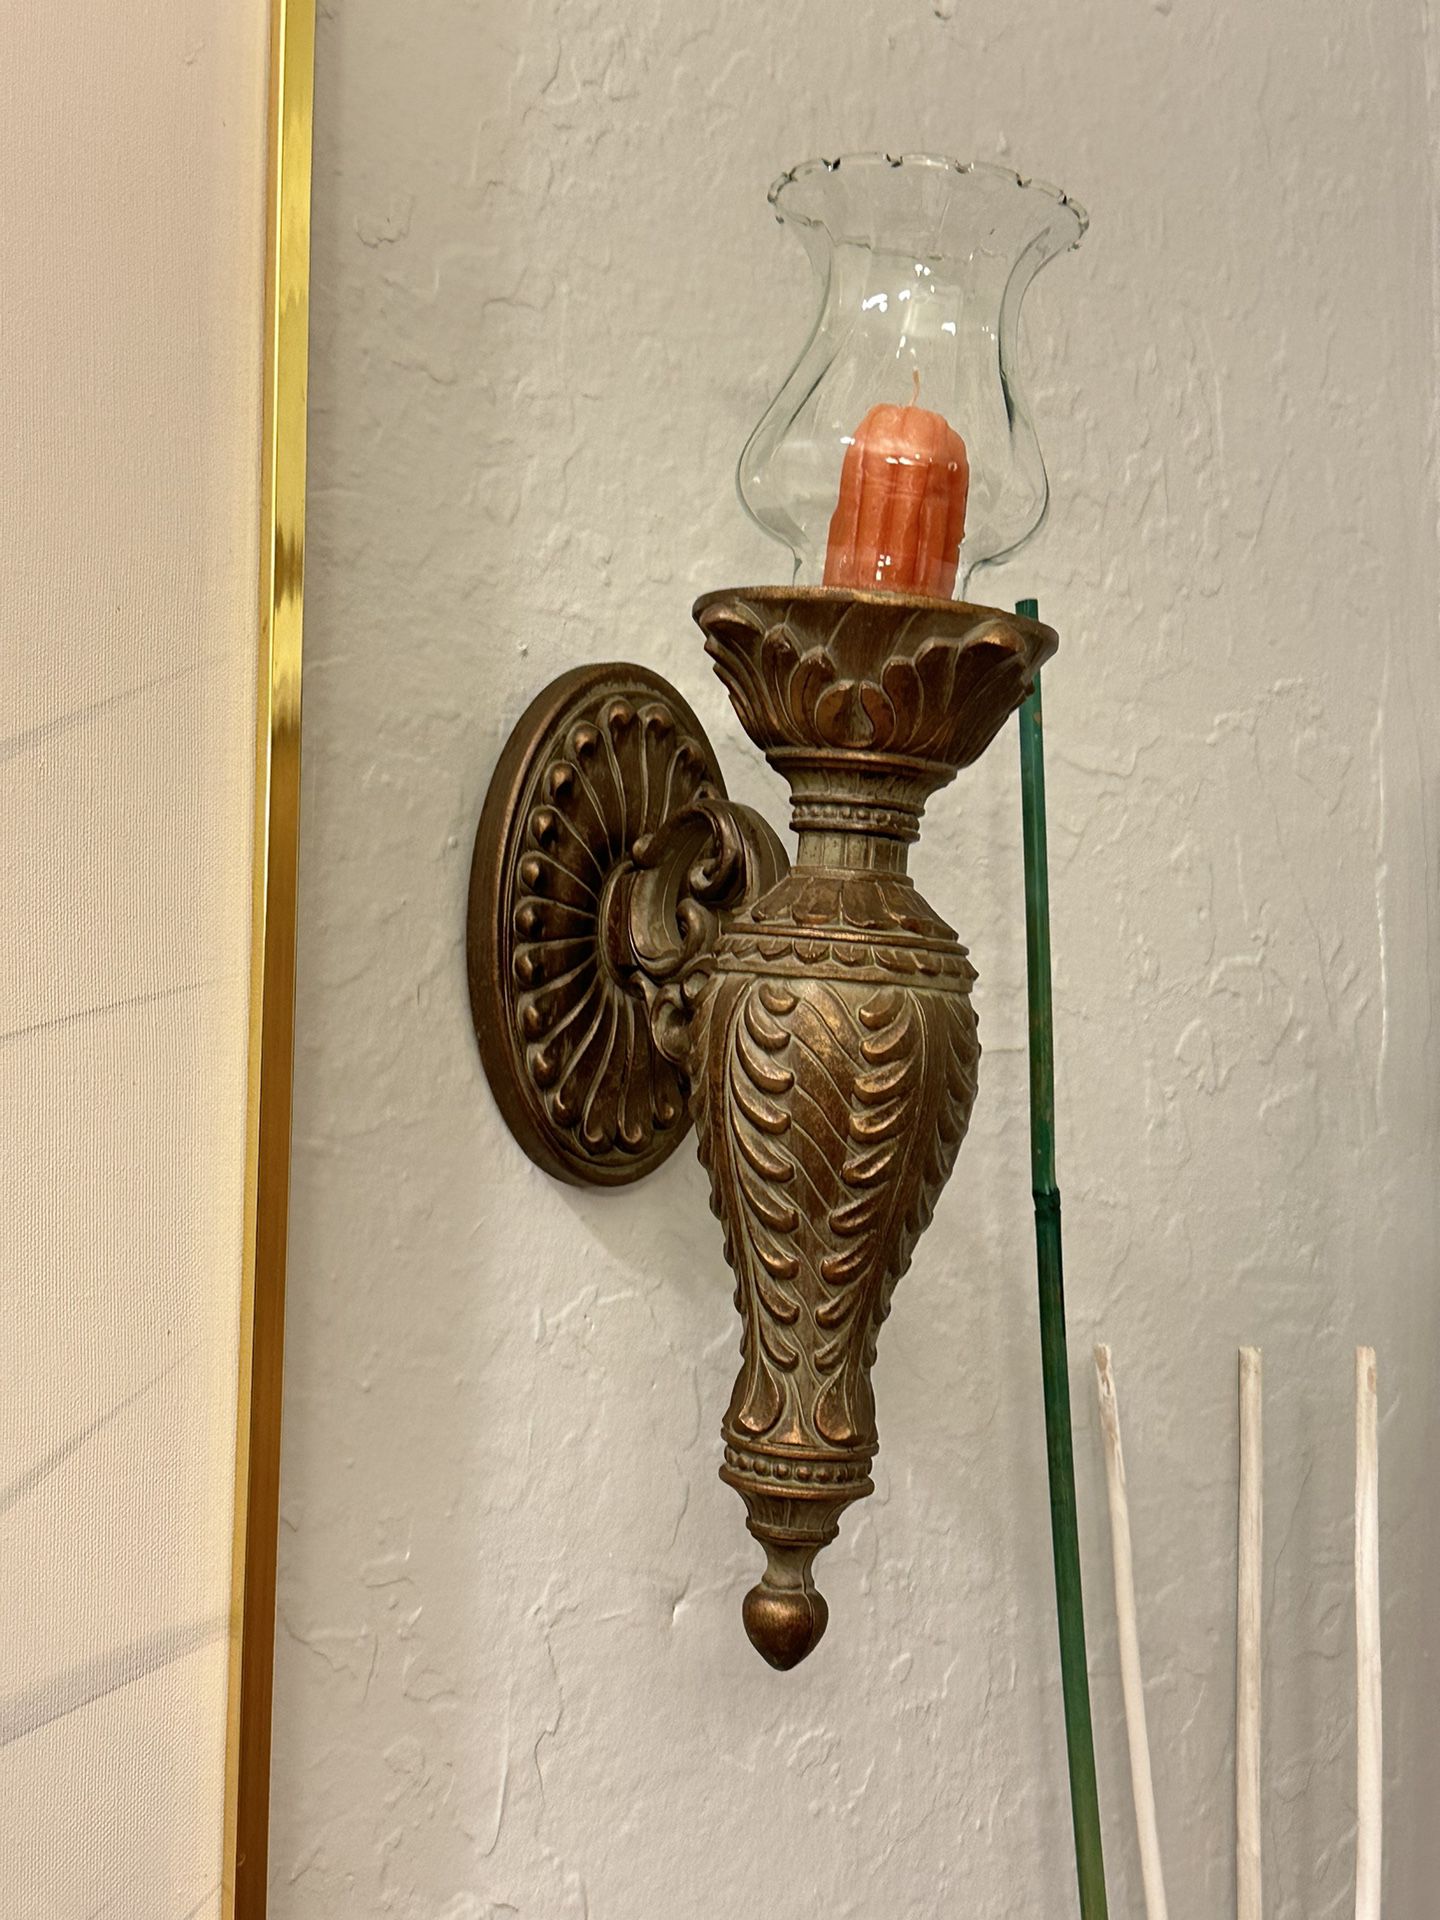 Home interior Vintage Resin aged copper contemporary sconce